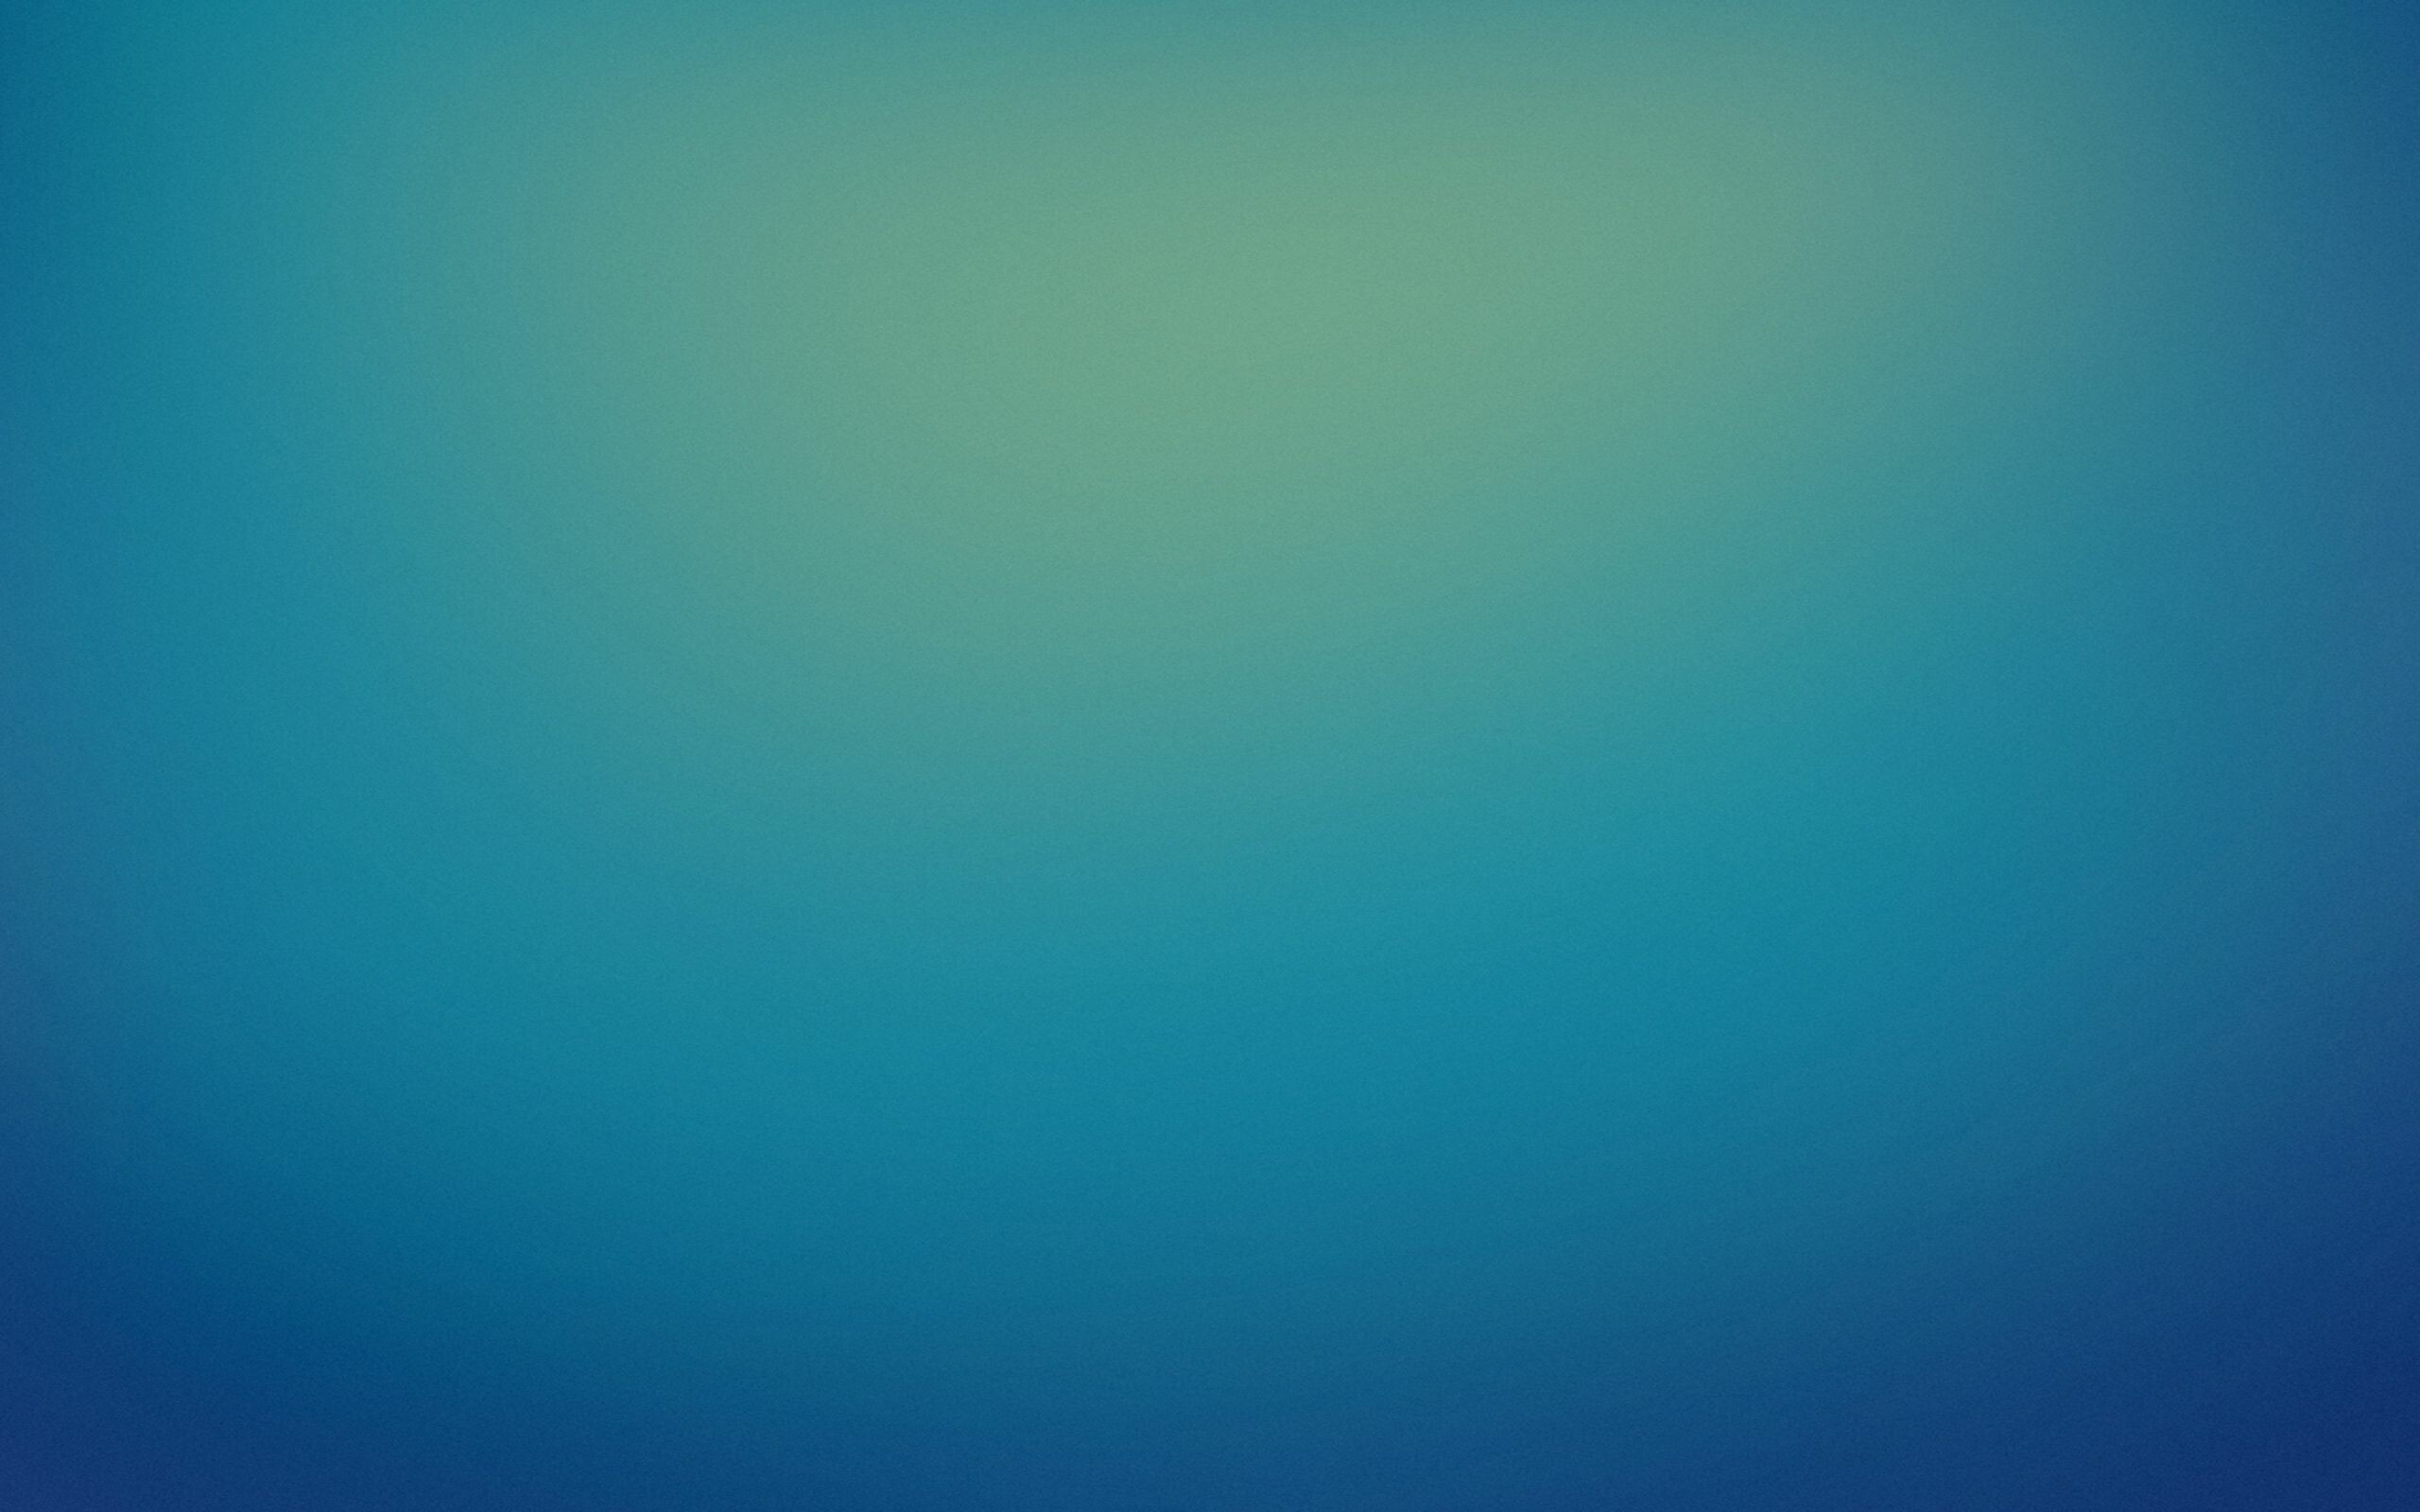 43+ Plain Color Computer Wallpapers: HD, 4K, 5K for PC and Mobile |  Download free images for iPhone, Android